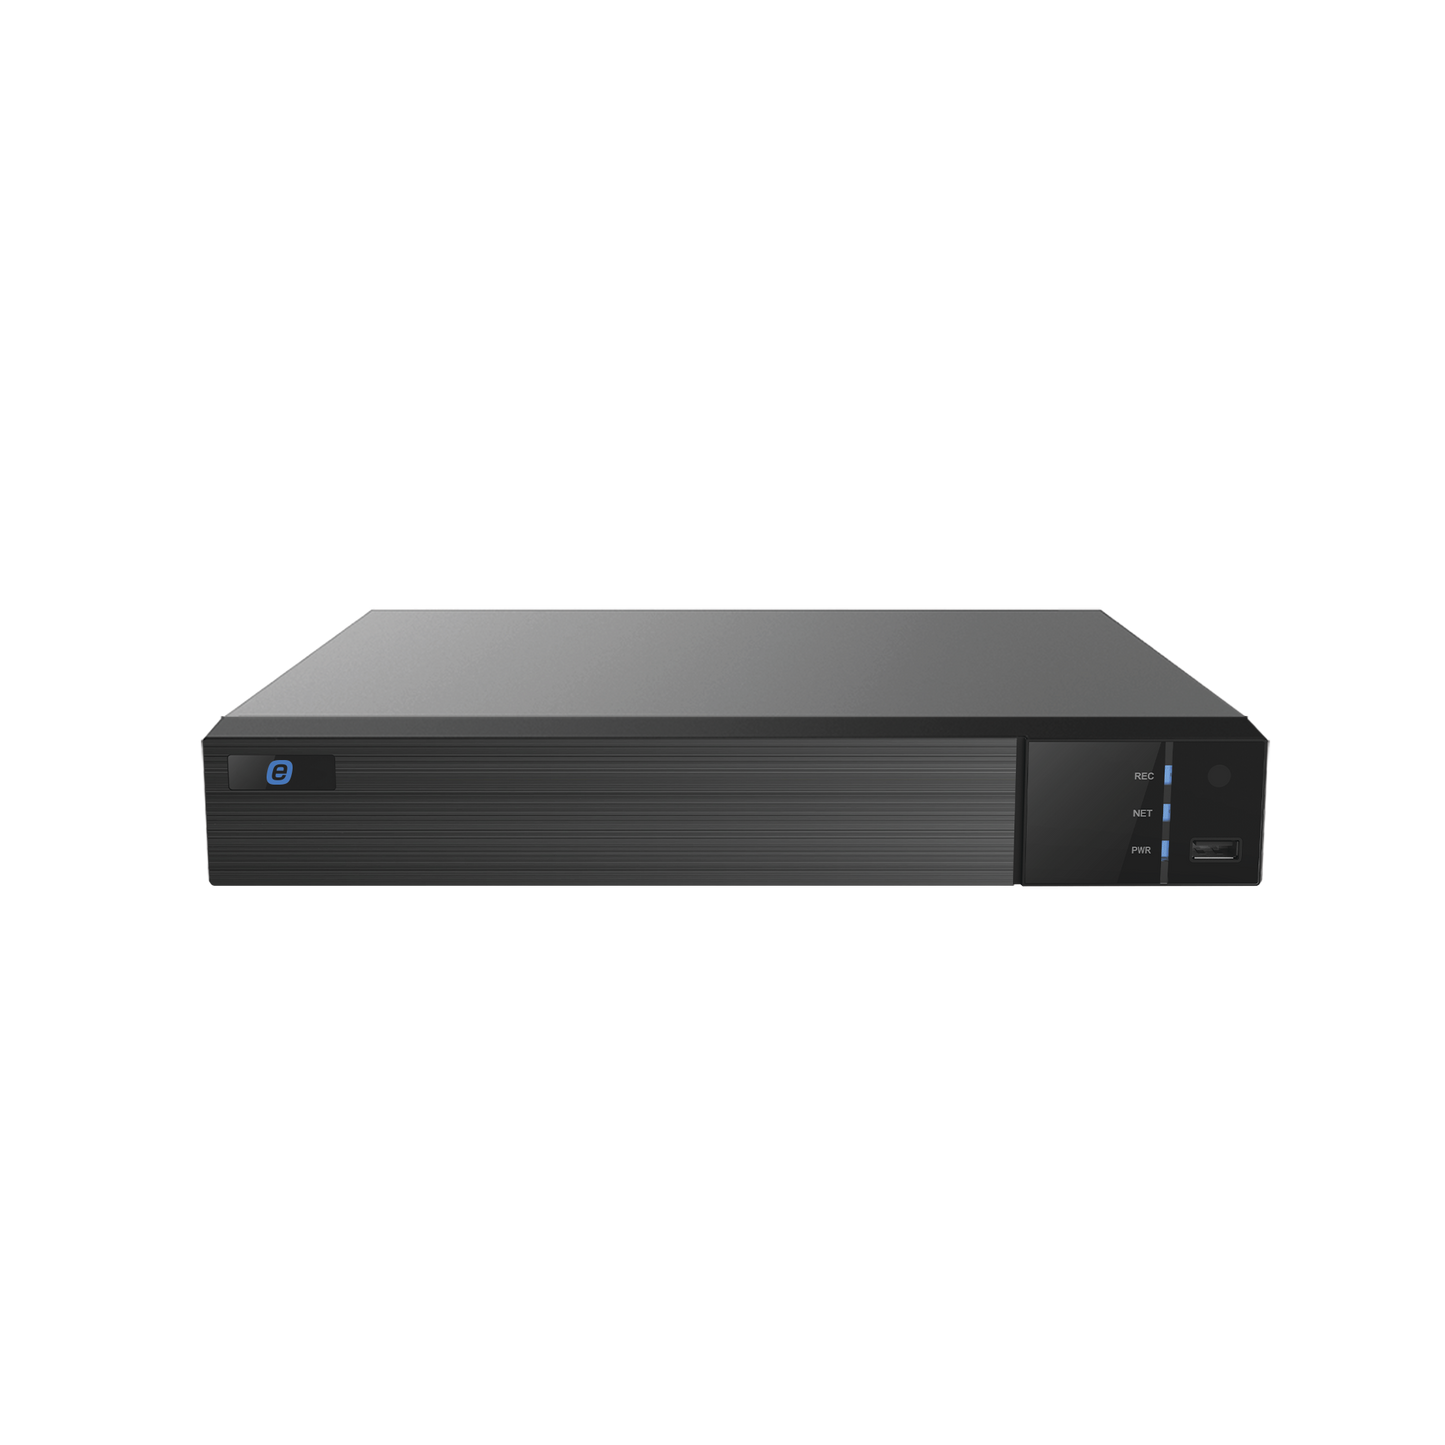 DVR 8MP (4K) / 8 Channels TURBOHD + 8 Channels IP / Support 2 Hard Disk / Video Output 4K / H.265 / AHD, TVI, CVBS, CVI / 8 Channels Audio / Audio by Coaxitron / Cloud Video Recording